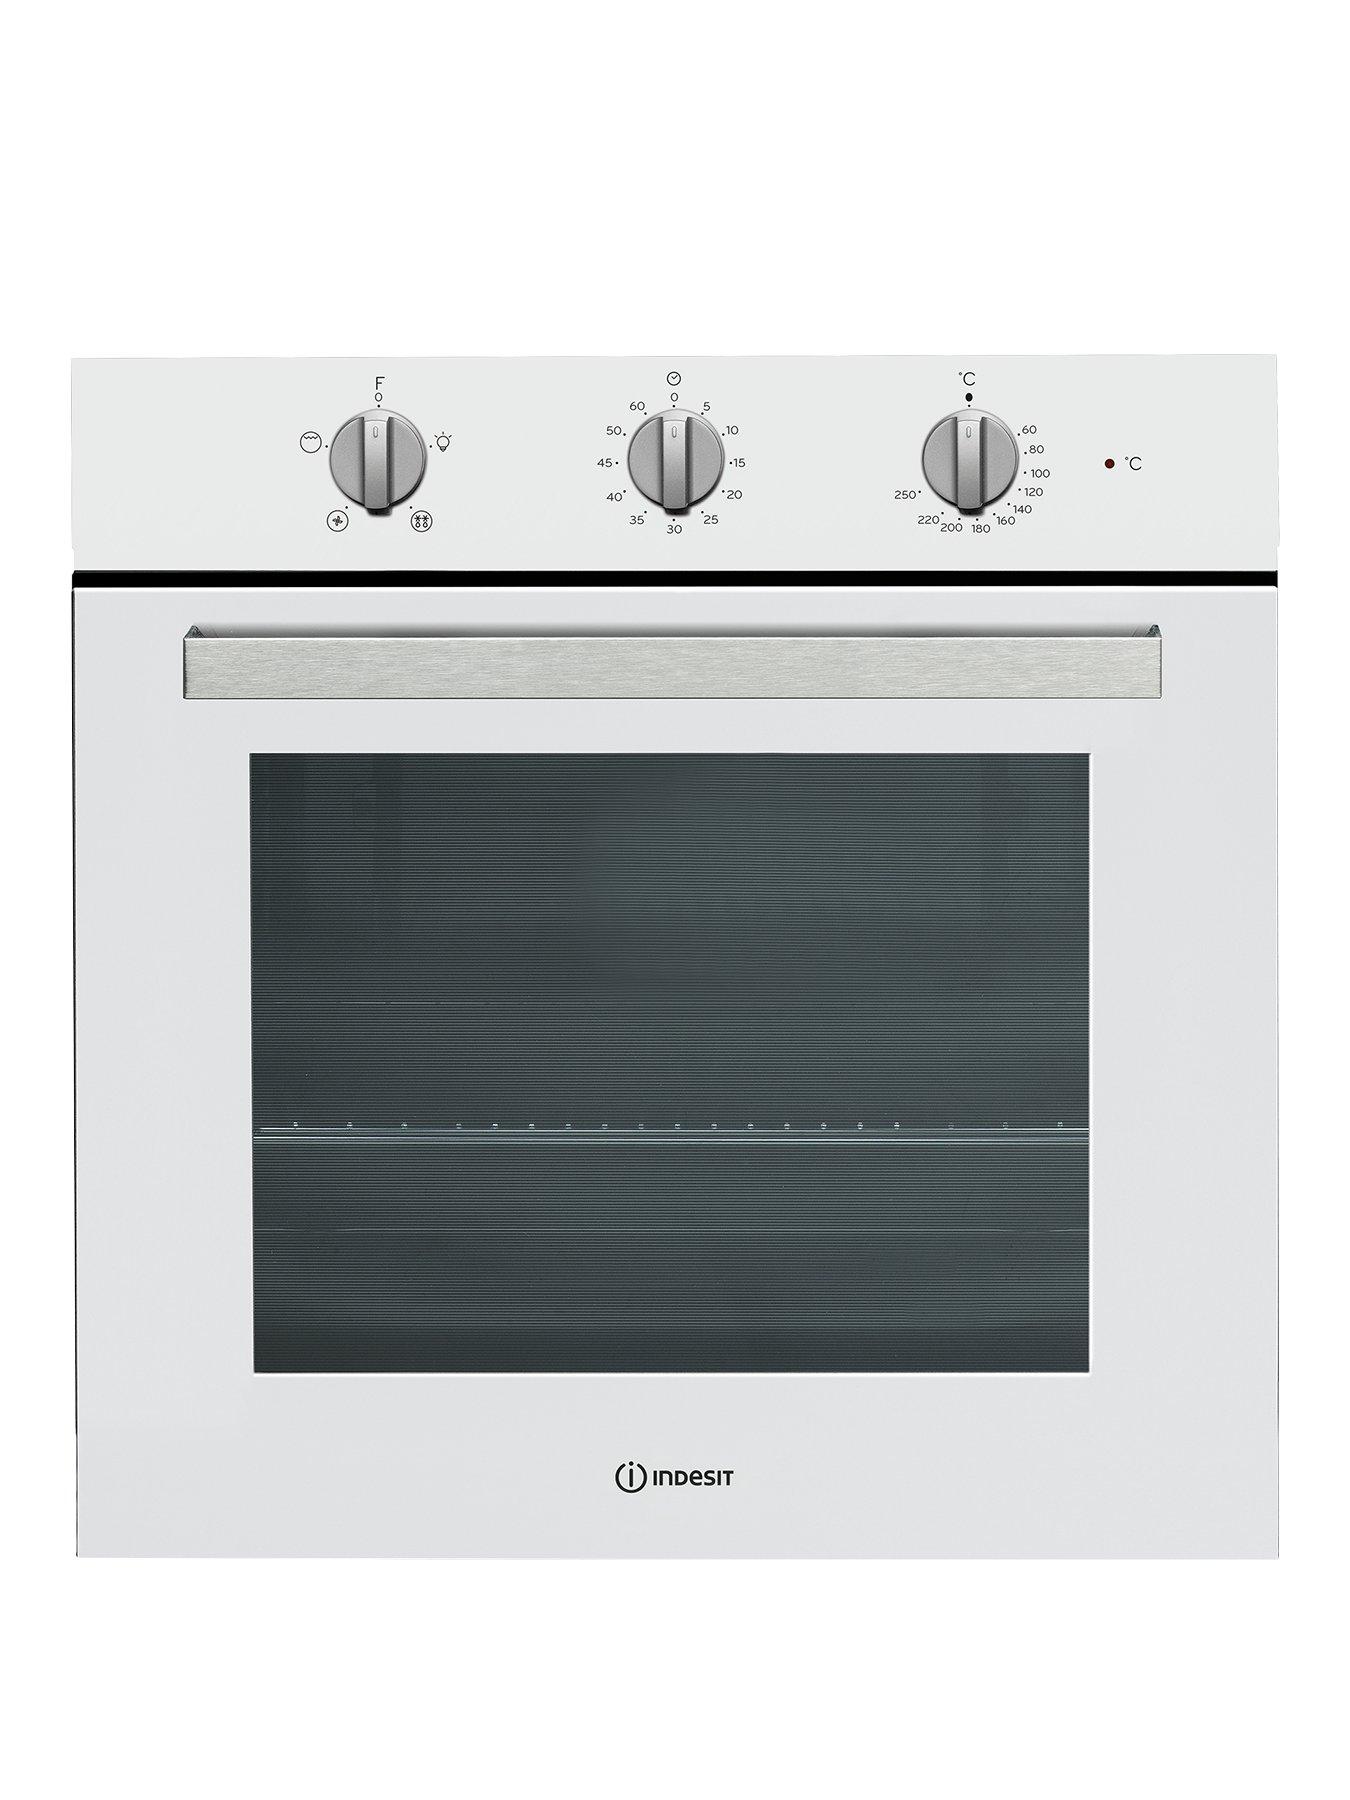 Indesit Aria Ifw6330Whuk 60Cm Wide Built-In Single Electric Oven - White - Oven Only